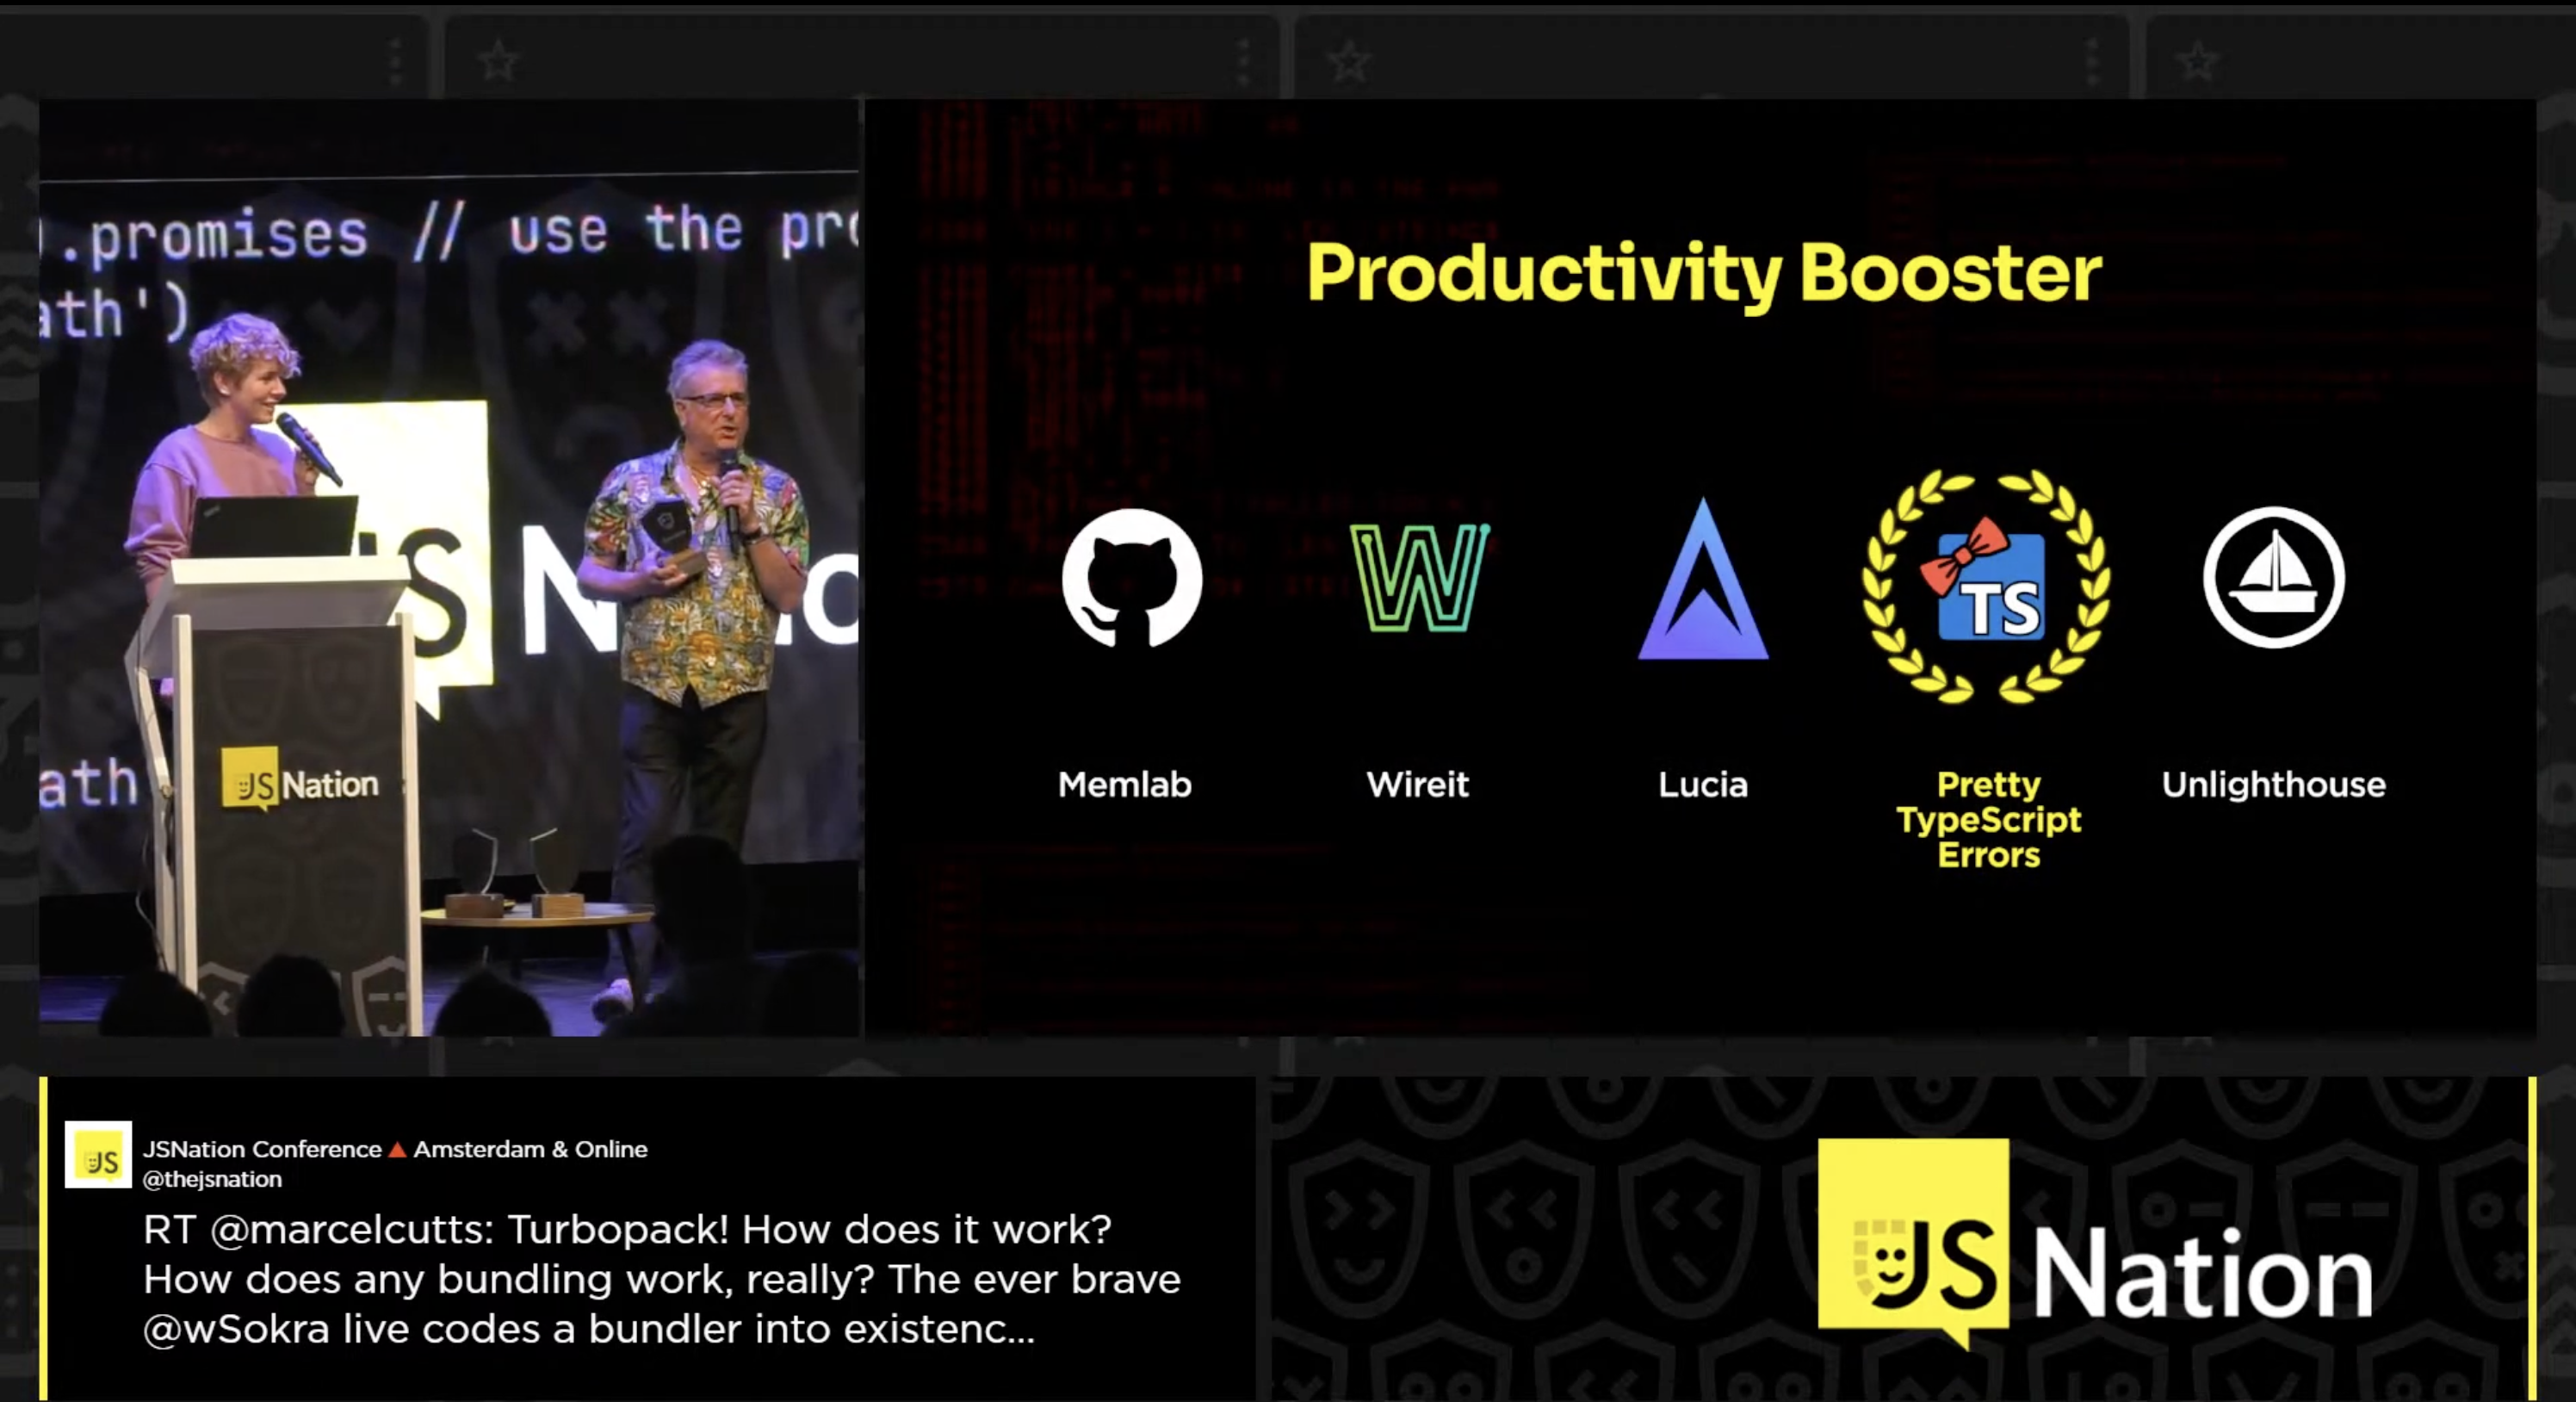 Winning the Productivity Booster category at JSNation 2023